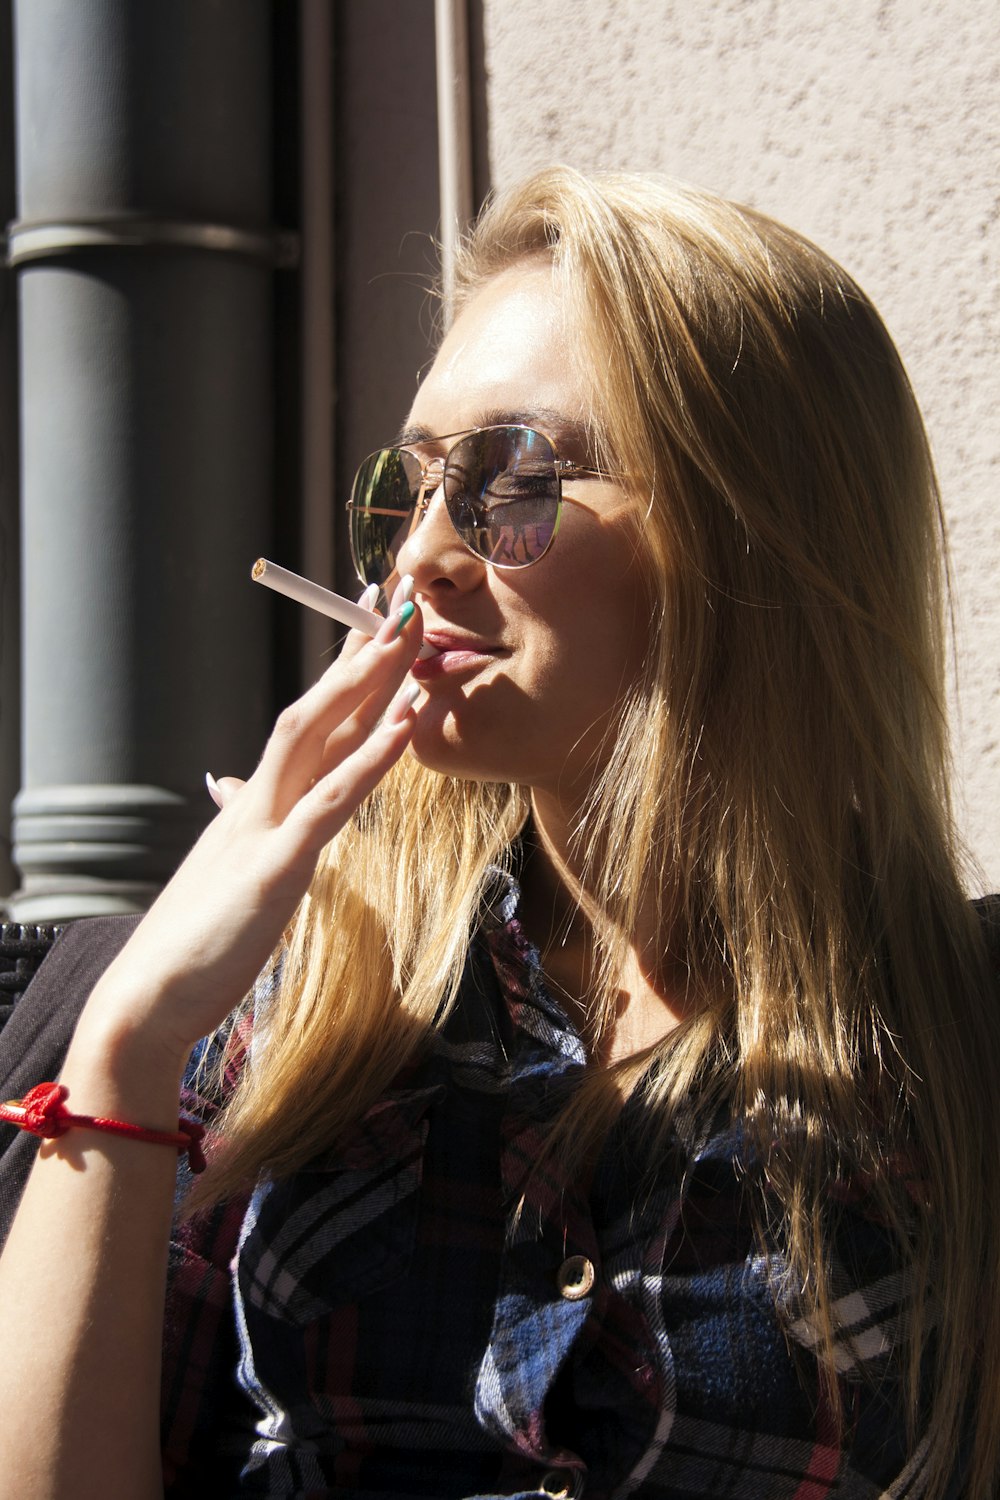 close-up photography of woman holding cigarette stick during daytime